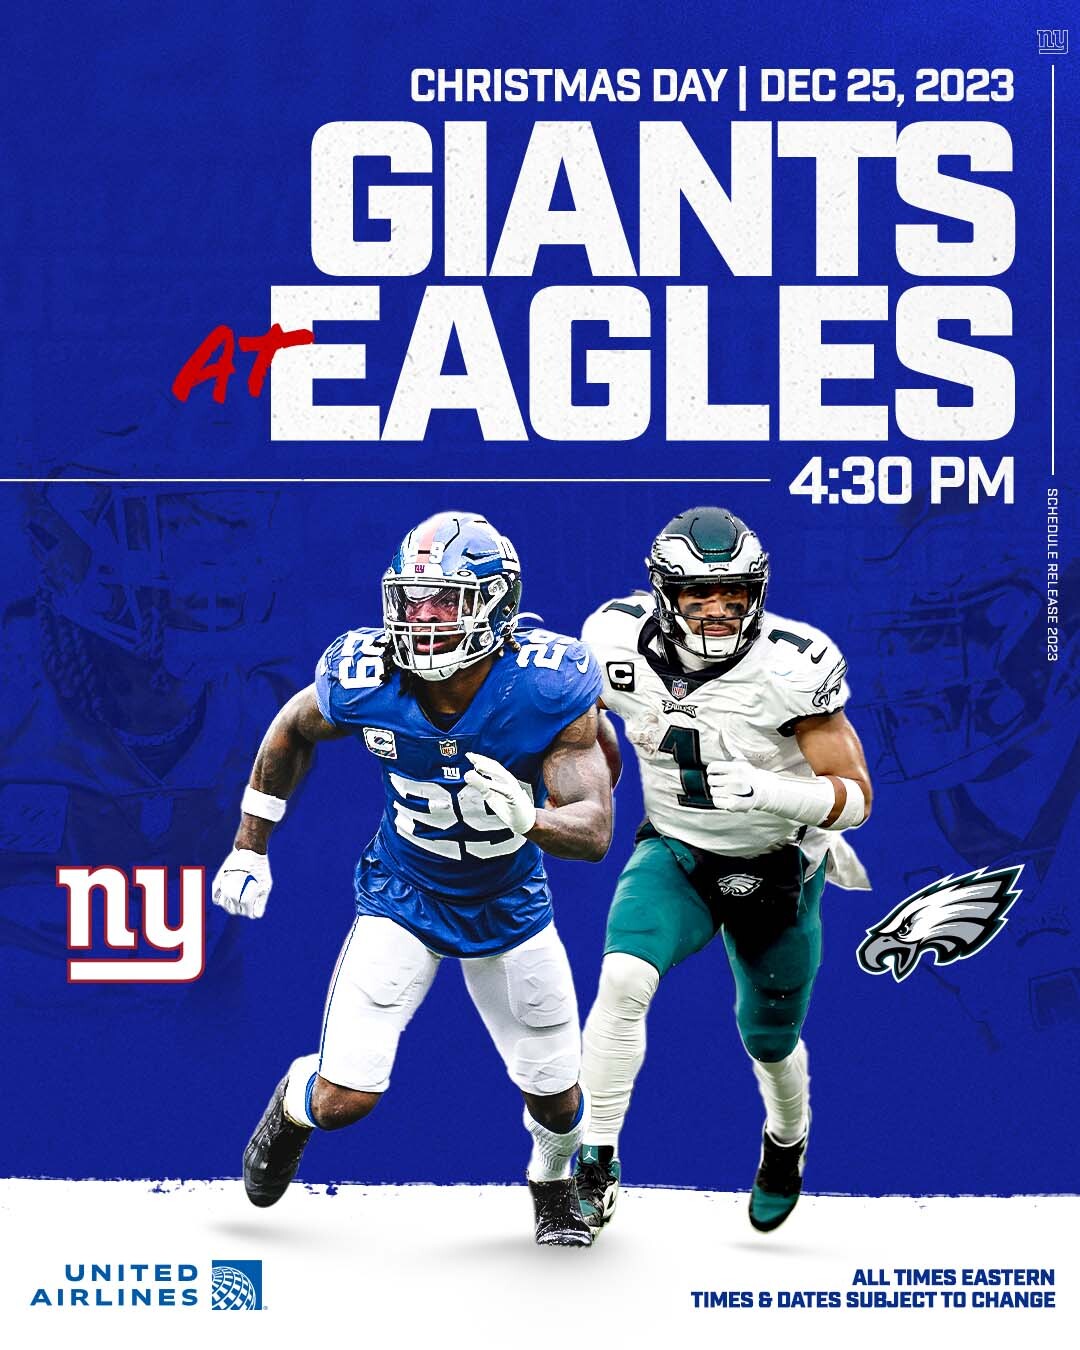 NFL on Twitter: 'RT @Giants: A Christmas rivalry 